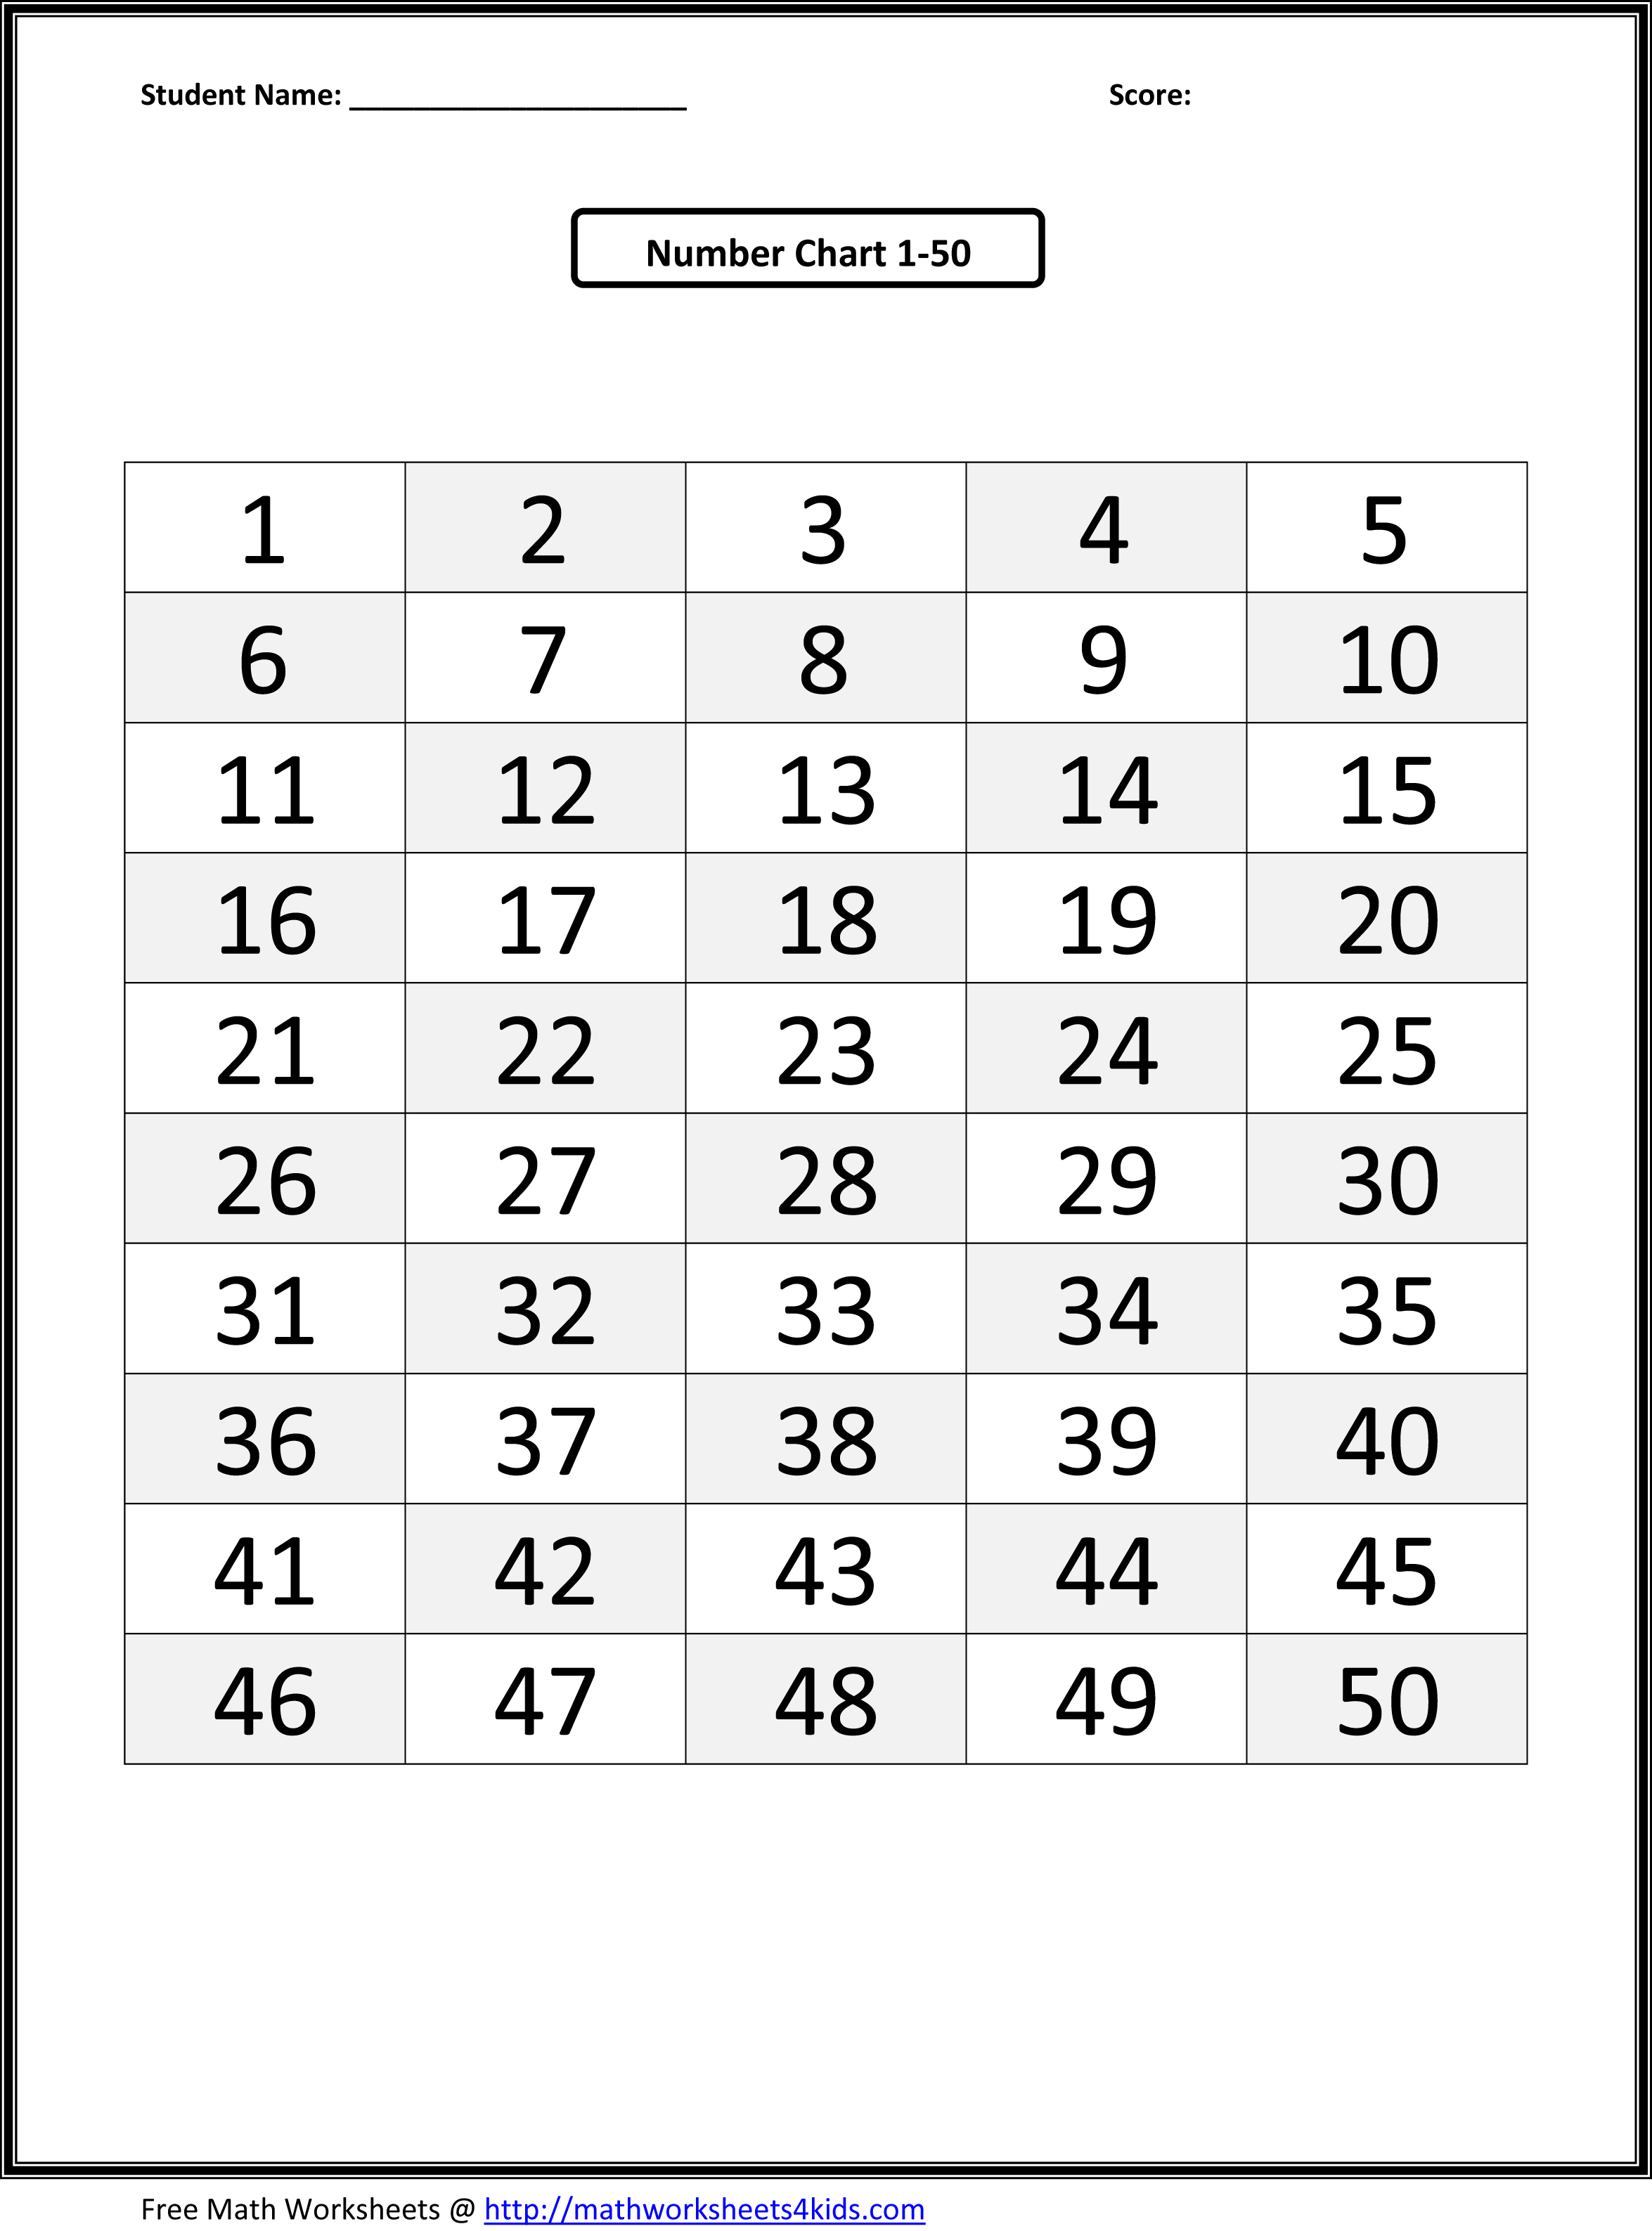 6 Best Images of Printable Number Chart 1 50 - Printable Number Chart 1